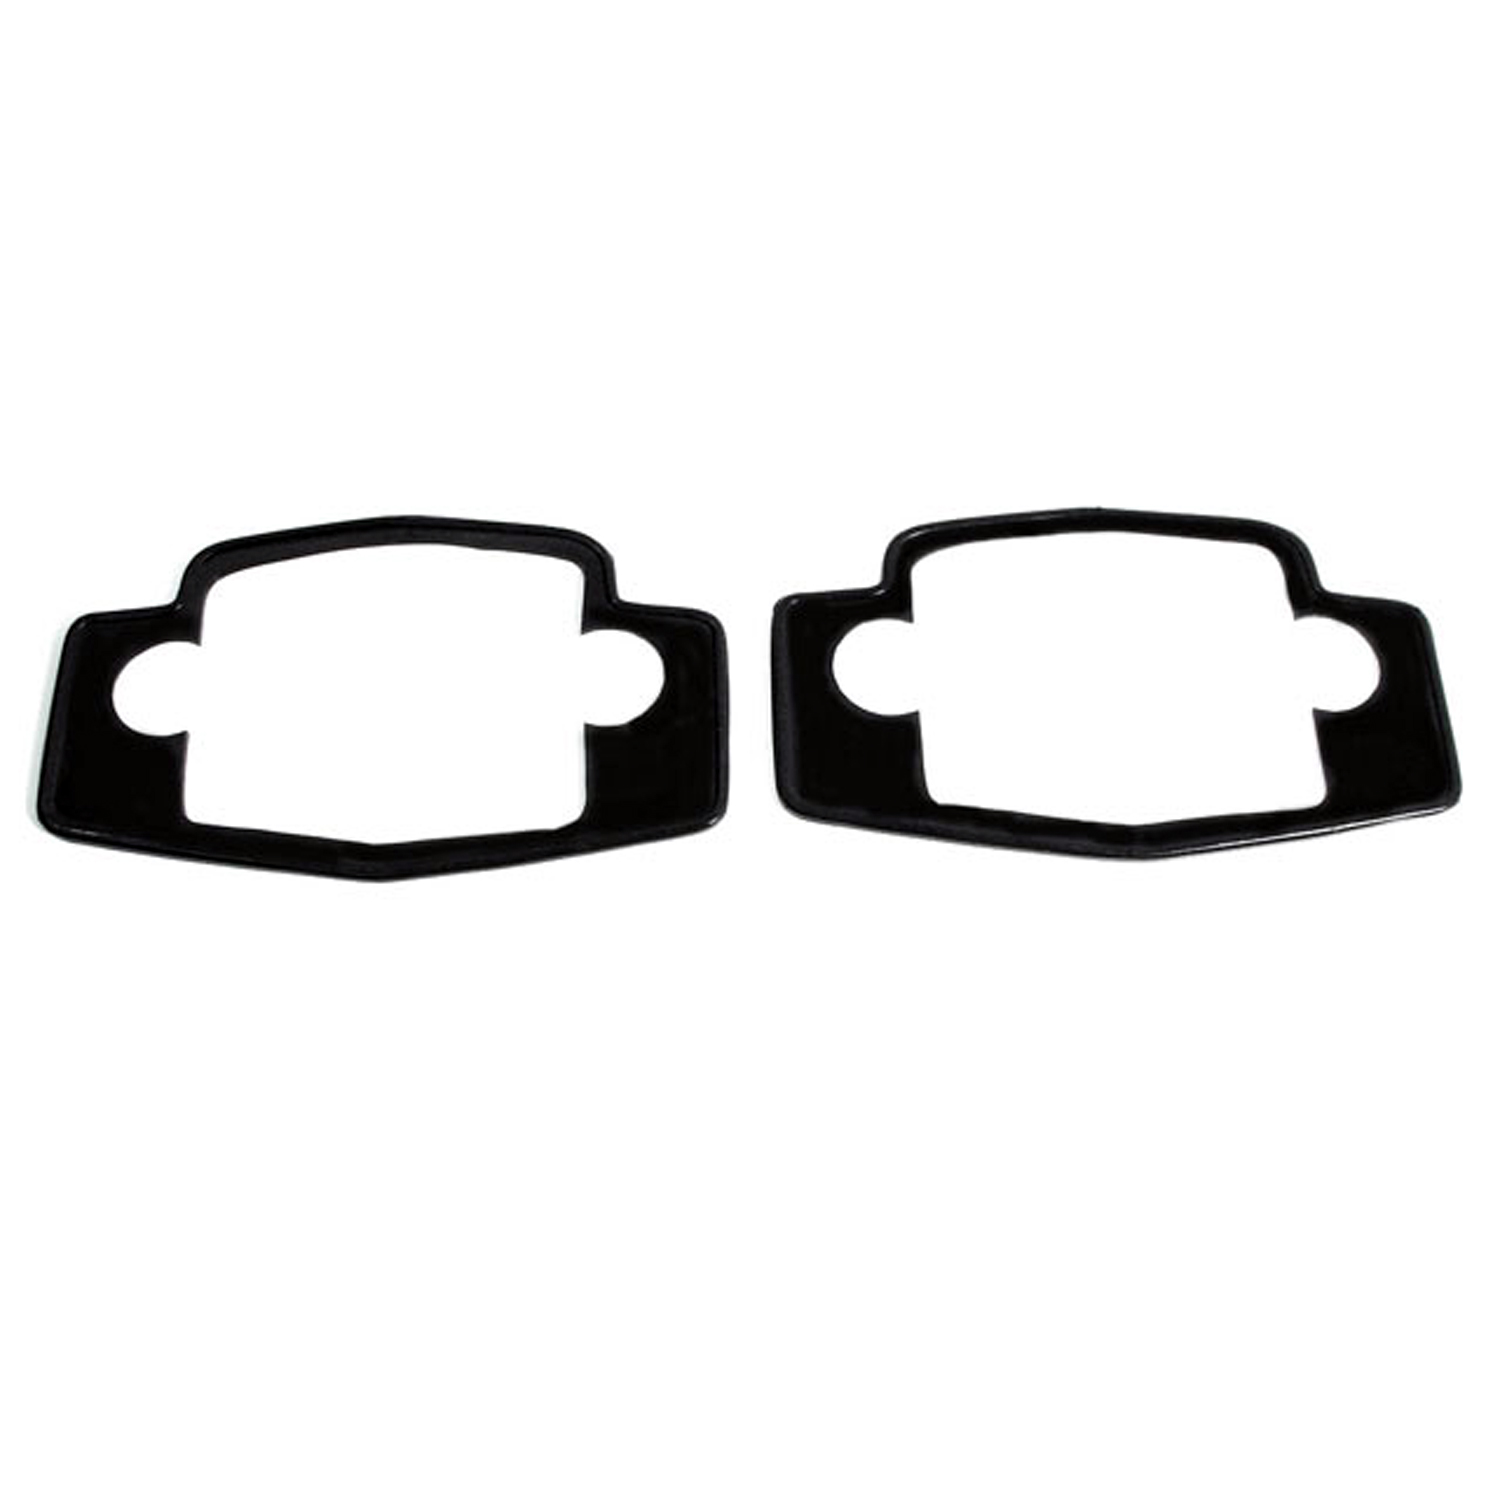 1940 Pontiac DELUXE SIX Tail-light Pads.  3-3/4 wide X 6-3/8 long.  Pair-MP 991-C